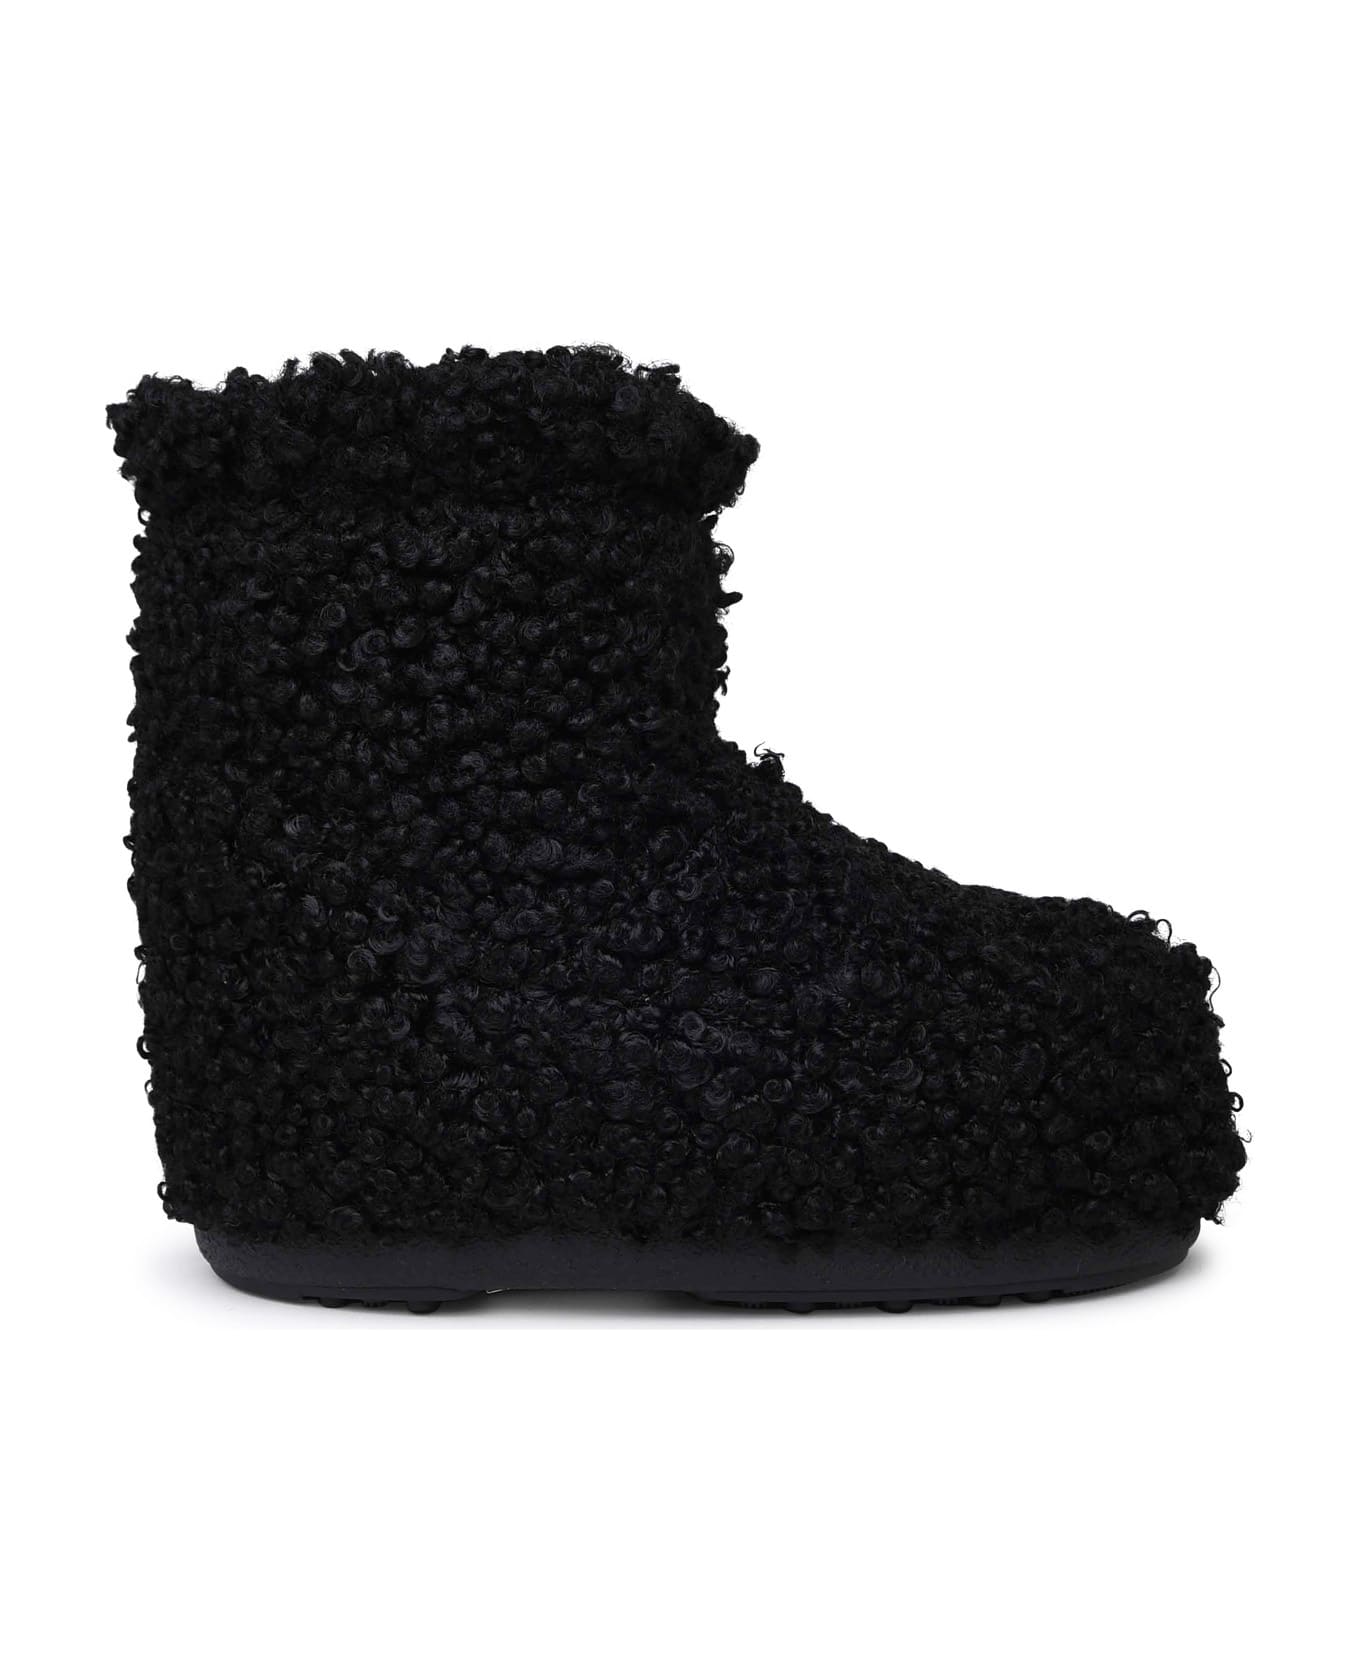 Moon Boot 'low-top Icon Faux' Black Polyester Boots - Black ブーツ